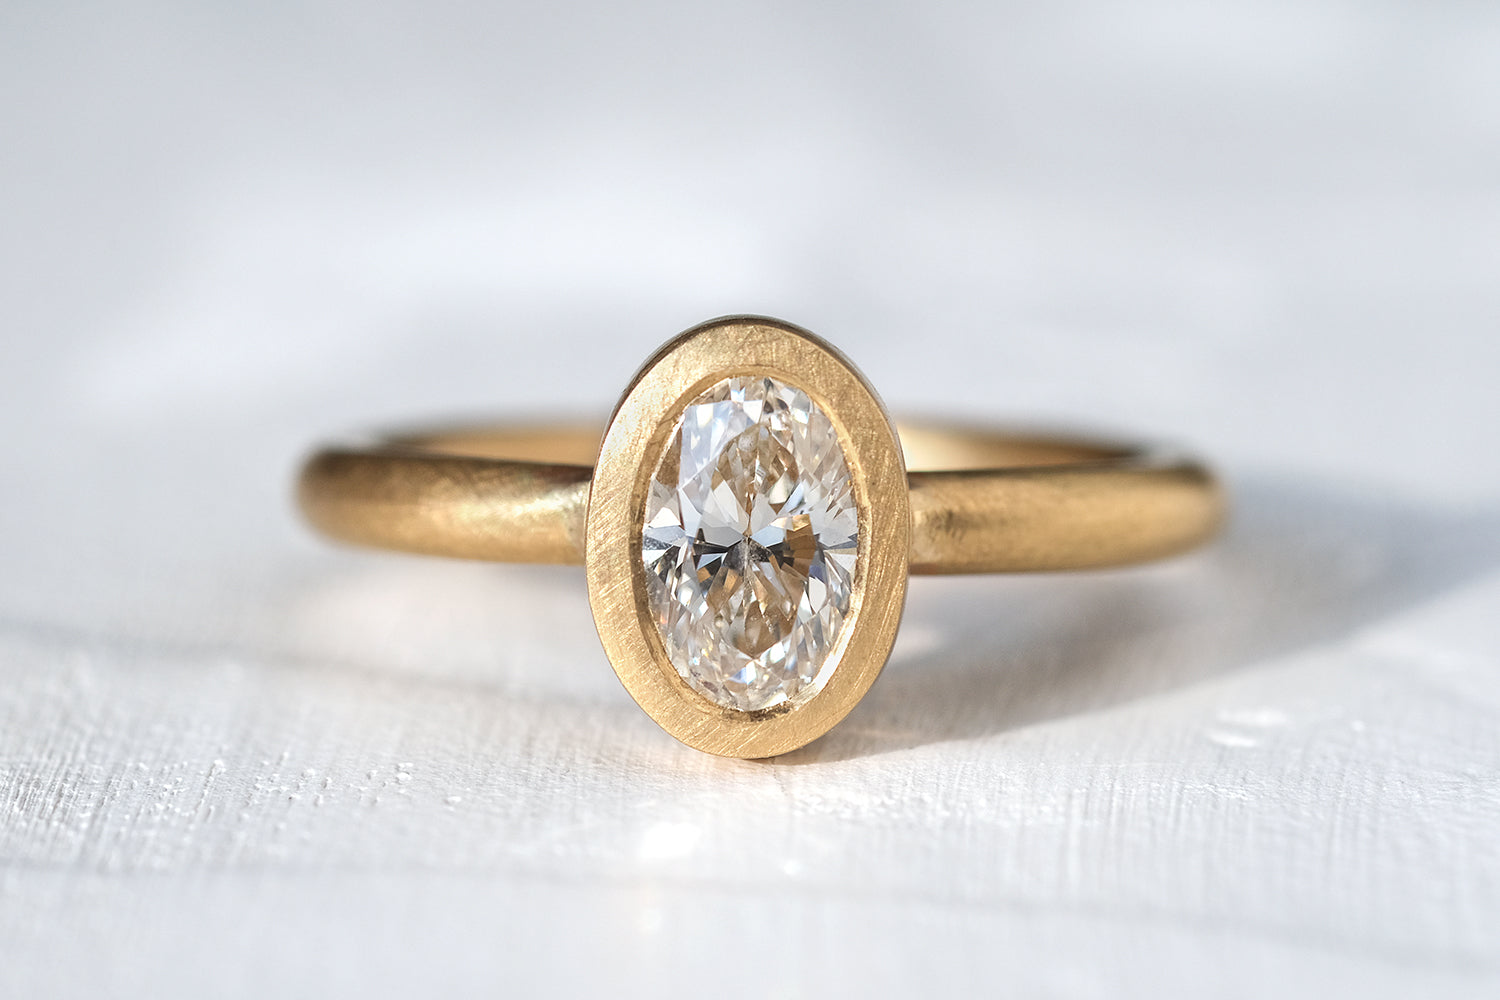 Gold Engagement Ring Set With An Oval Cut Diamond